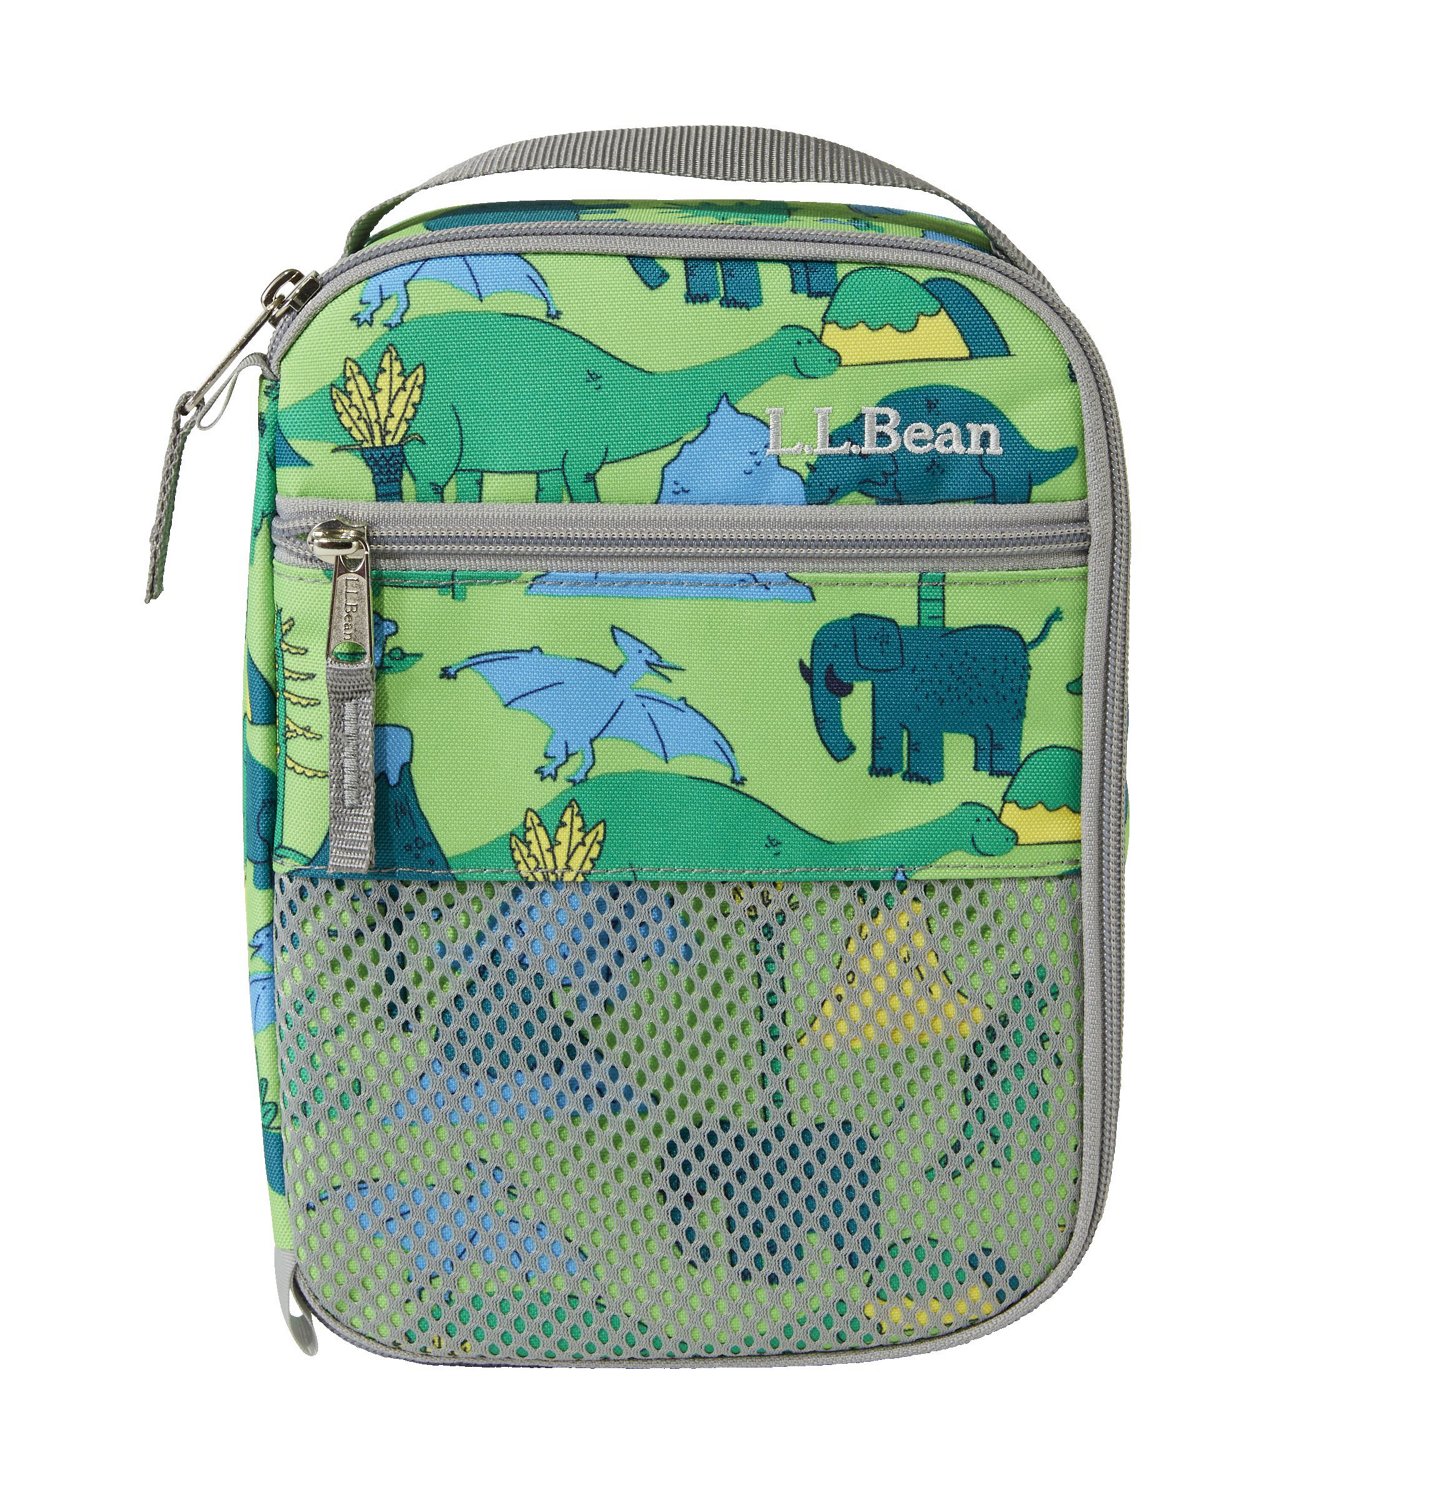 https://academy.scene7.com/is/image/academy//coolers/llbean-neon-dino-print-lunch-box-48786-green/7162a0d44c4f46188ca2628871b83bff